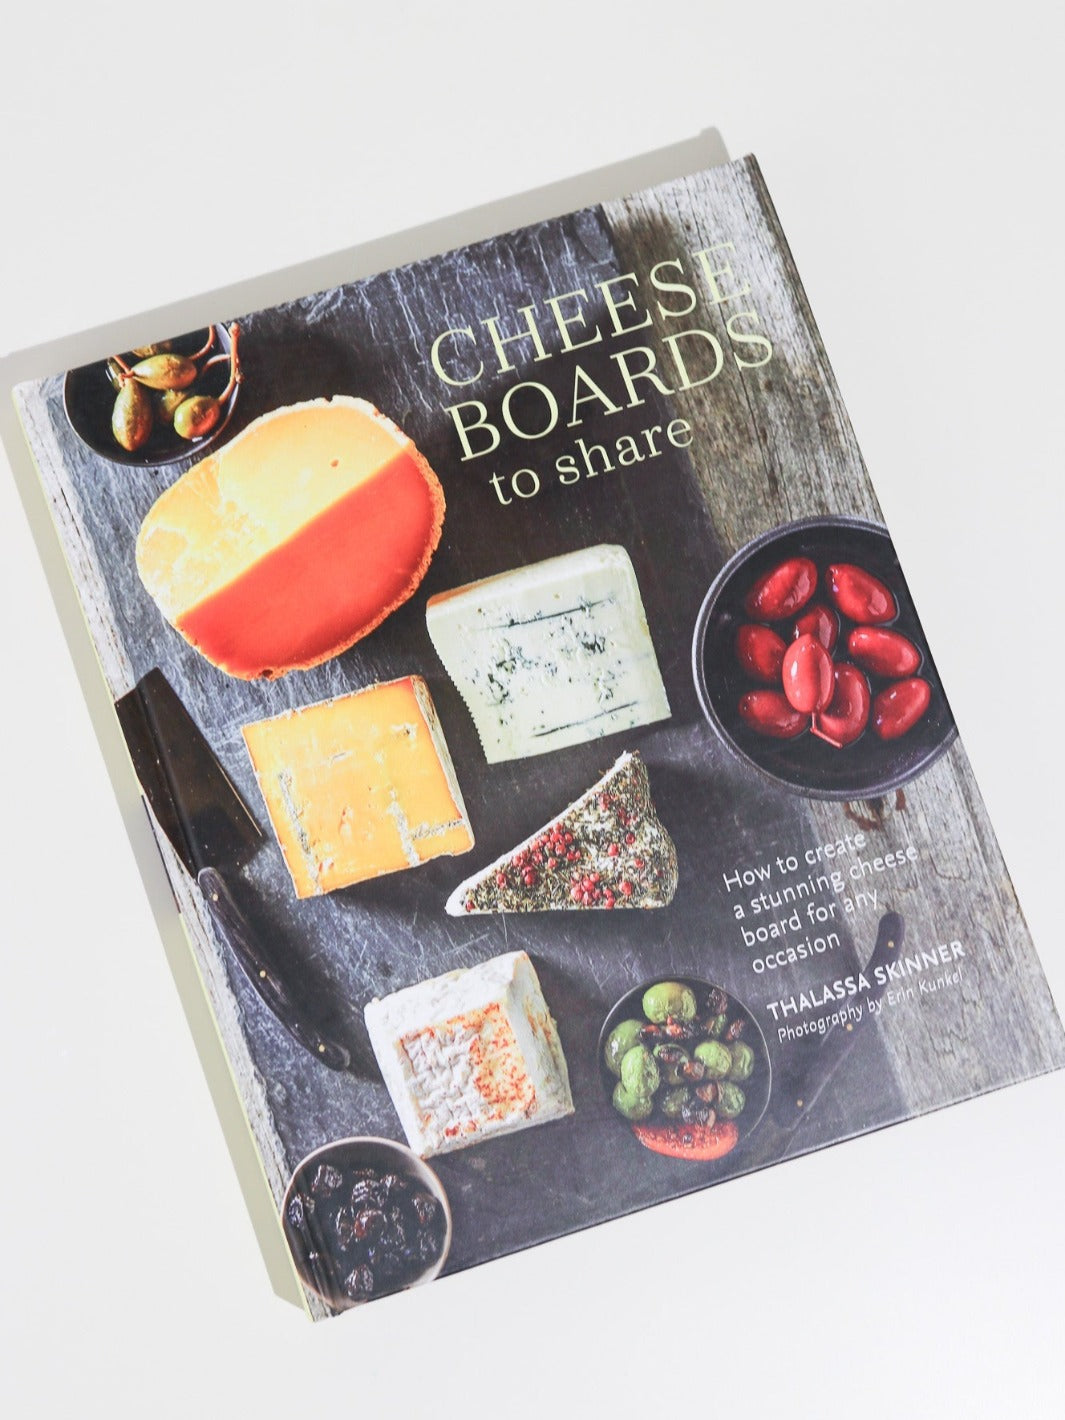 Cheese Boards to Share - Heyday